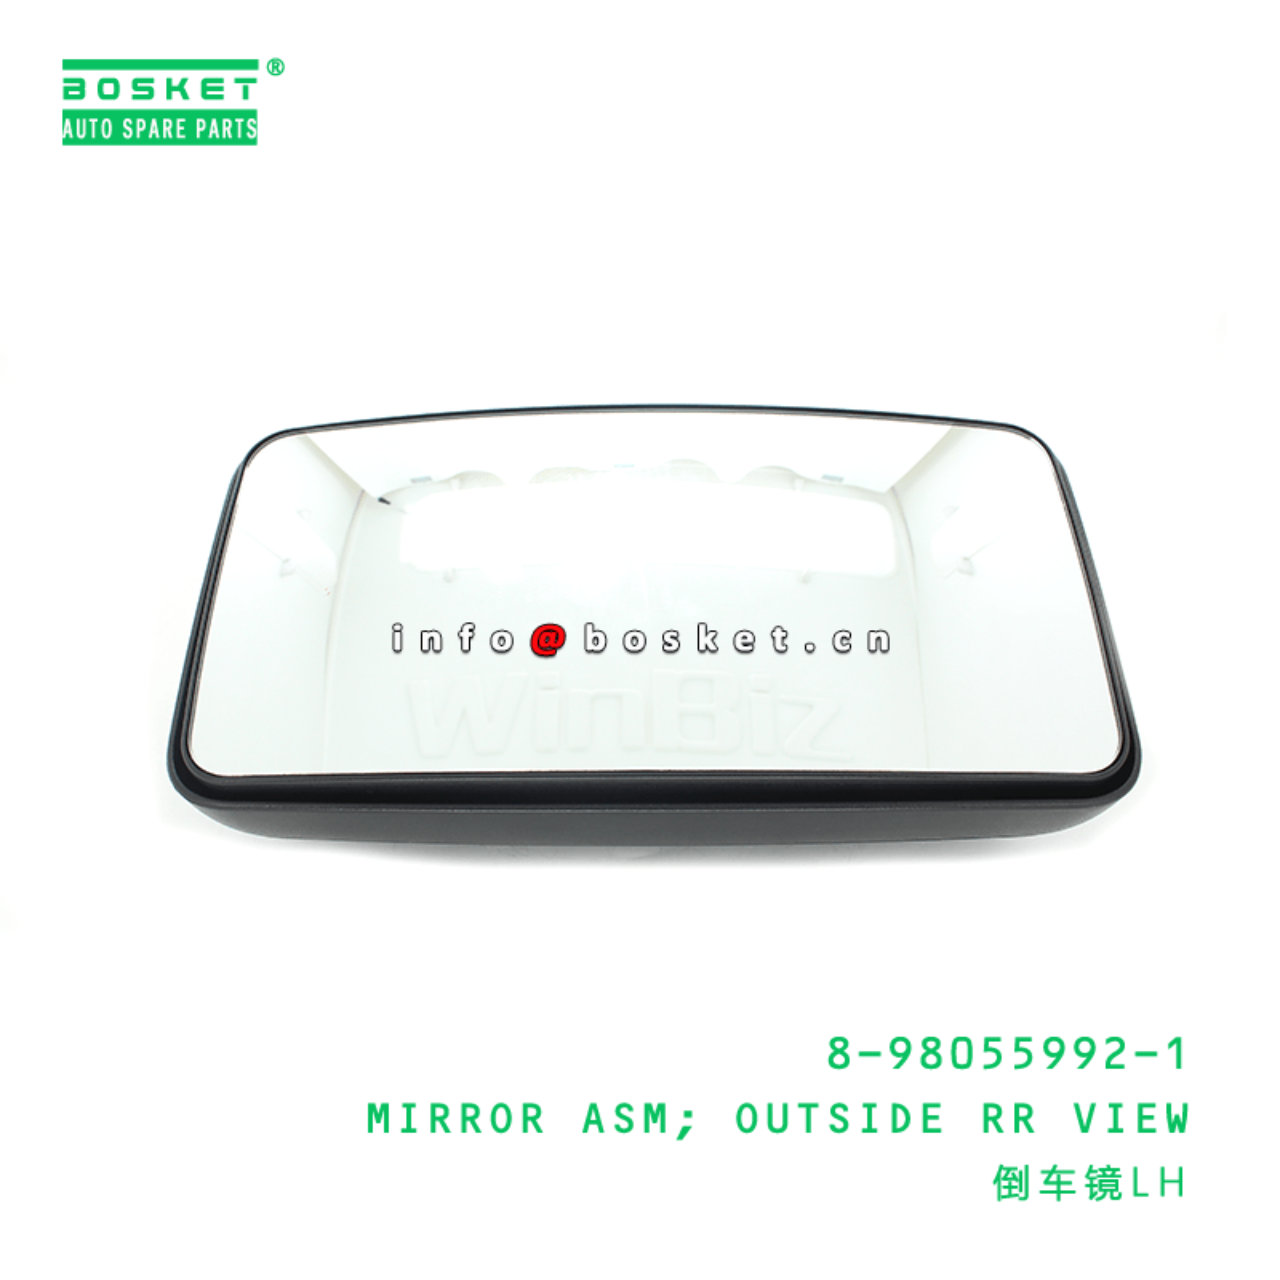 8-98055992-1 Outside Rear View Mirror Assembly 8980559921 Suitable for ISUZU NMR 4HK1 